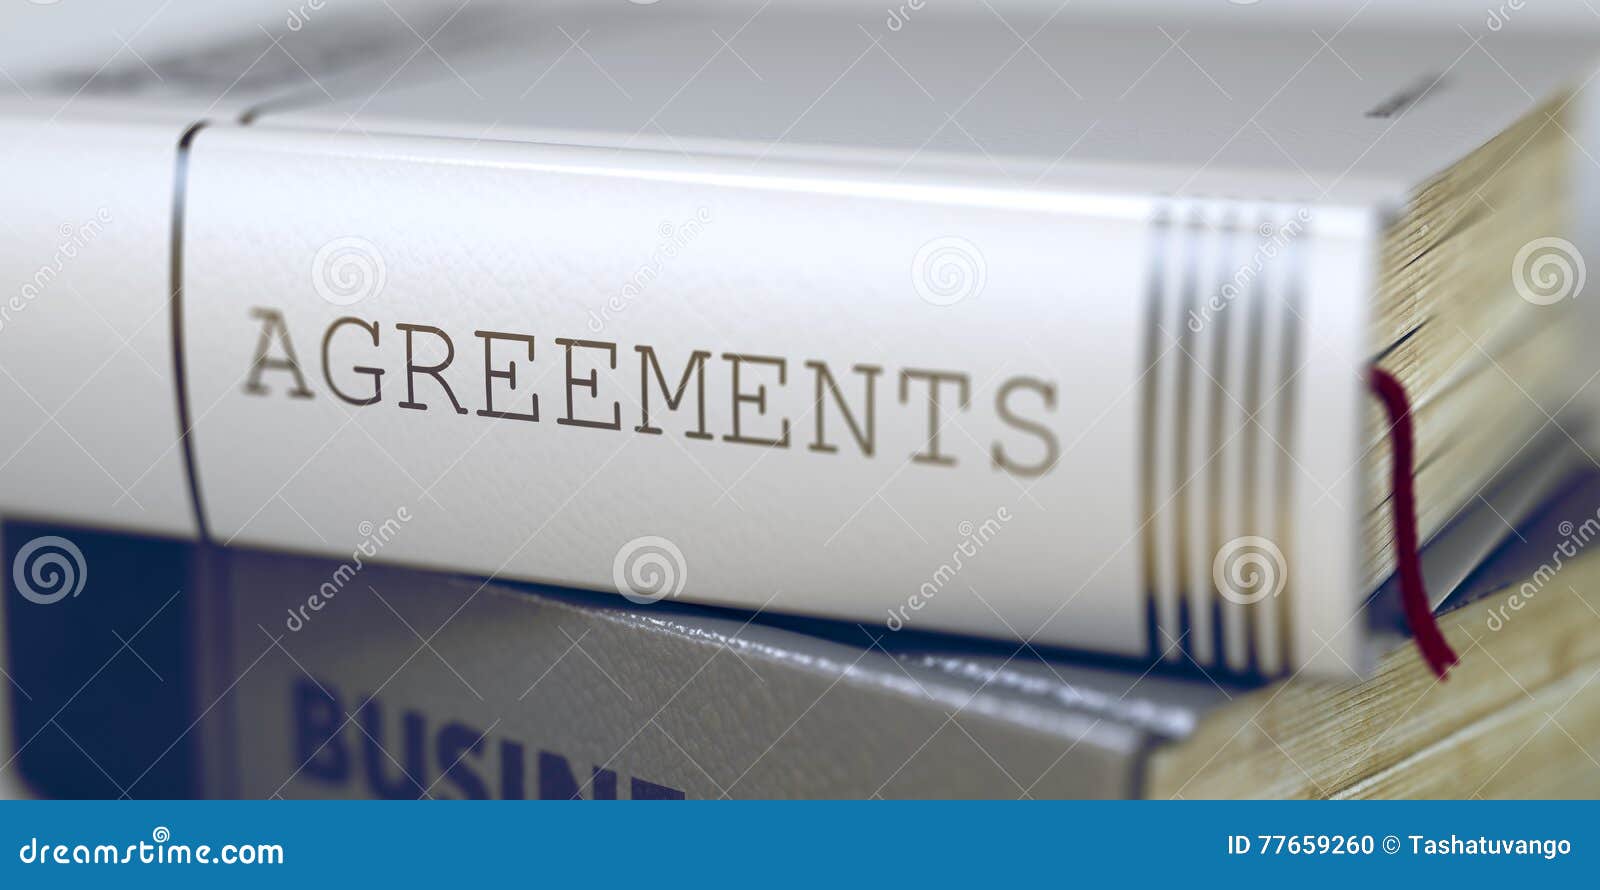 agreements - business book title. 3d.